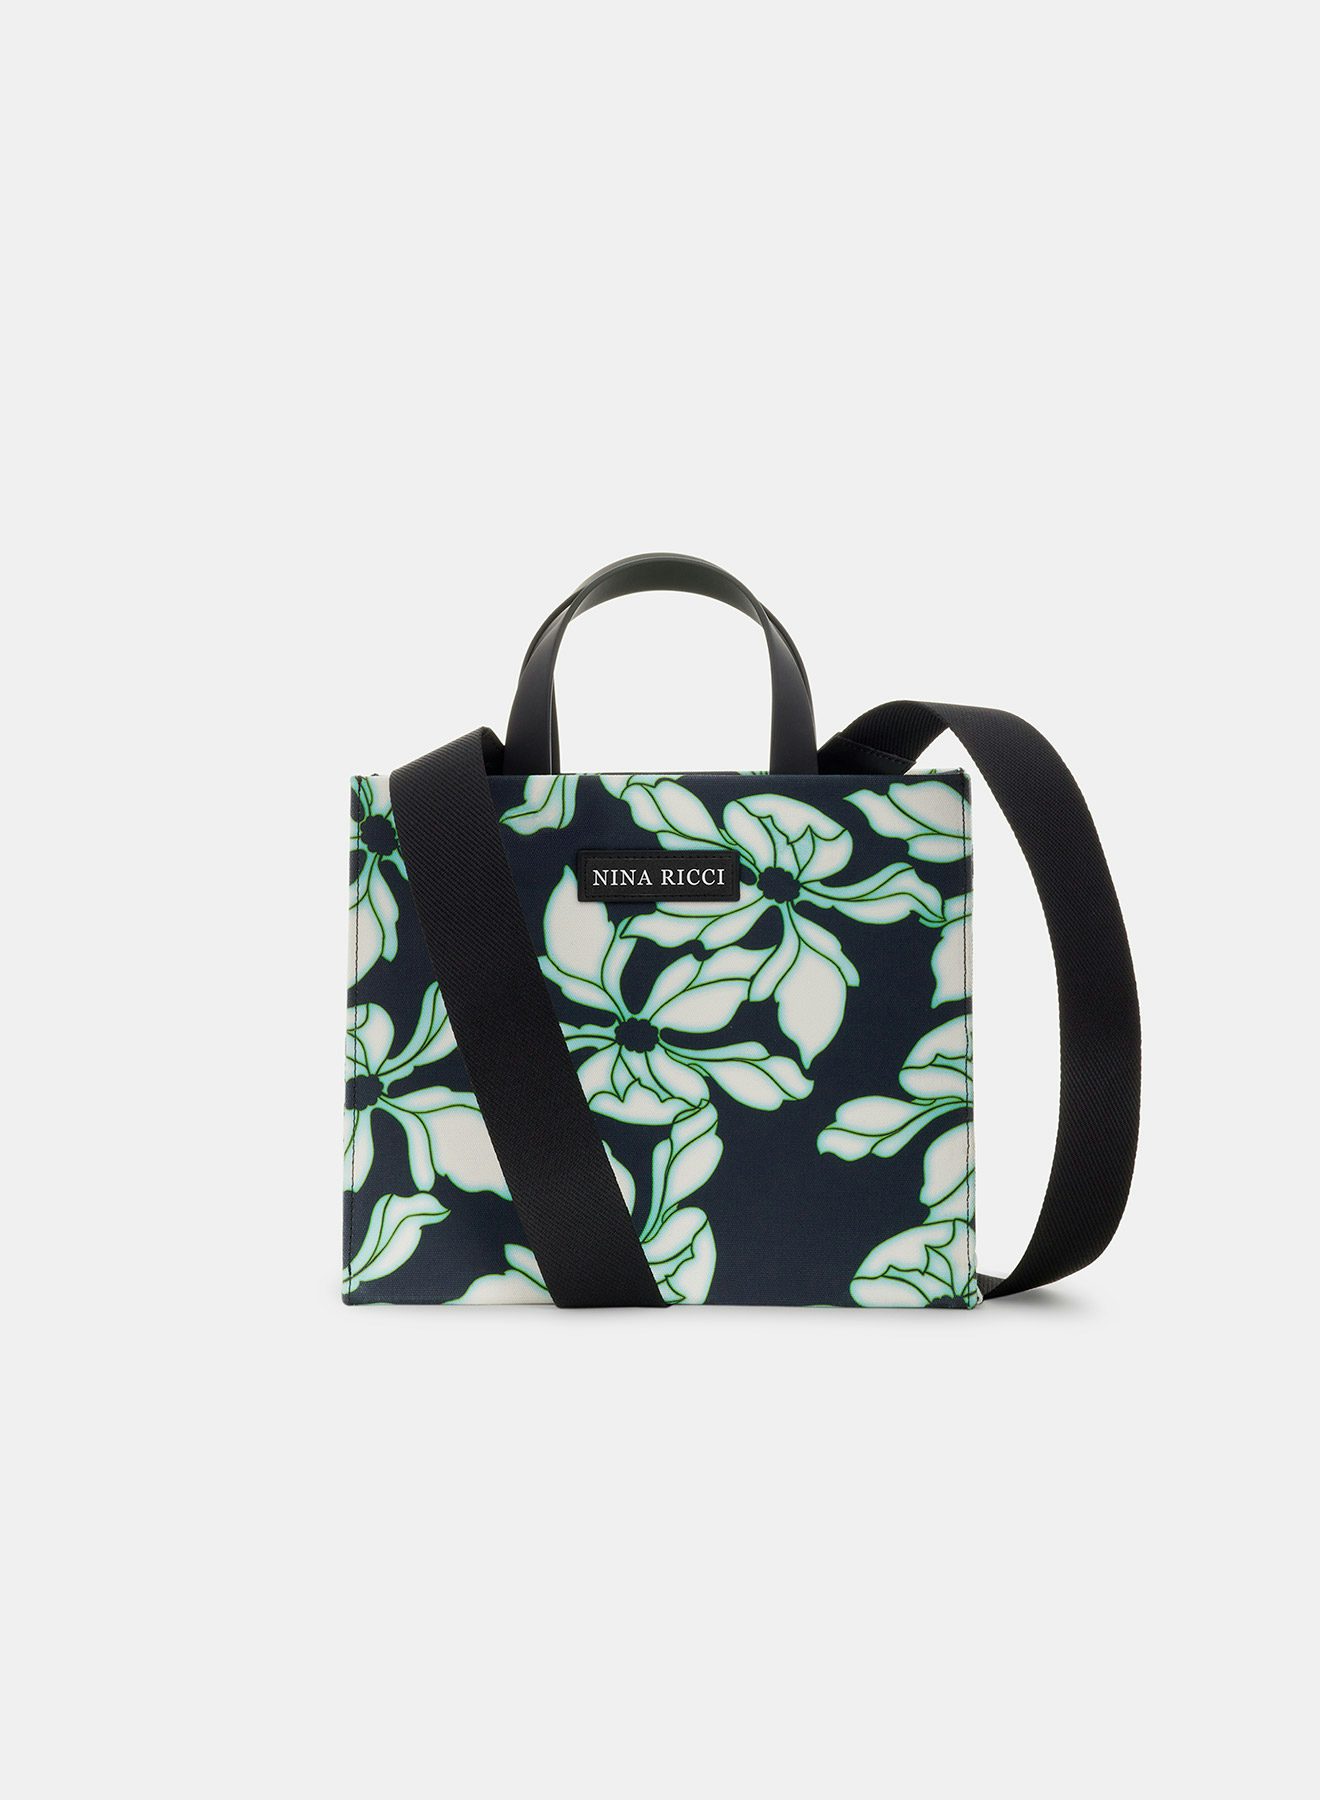 Small neoprene tote bag with removable shoulder strap in water green and black floral print - Nina Ricci